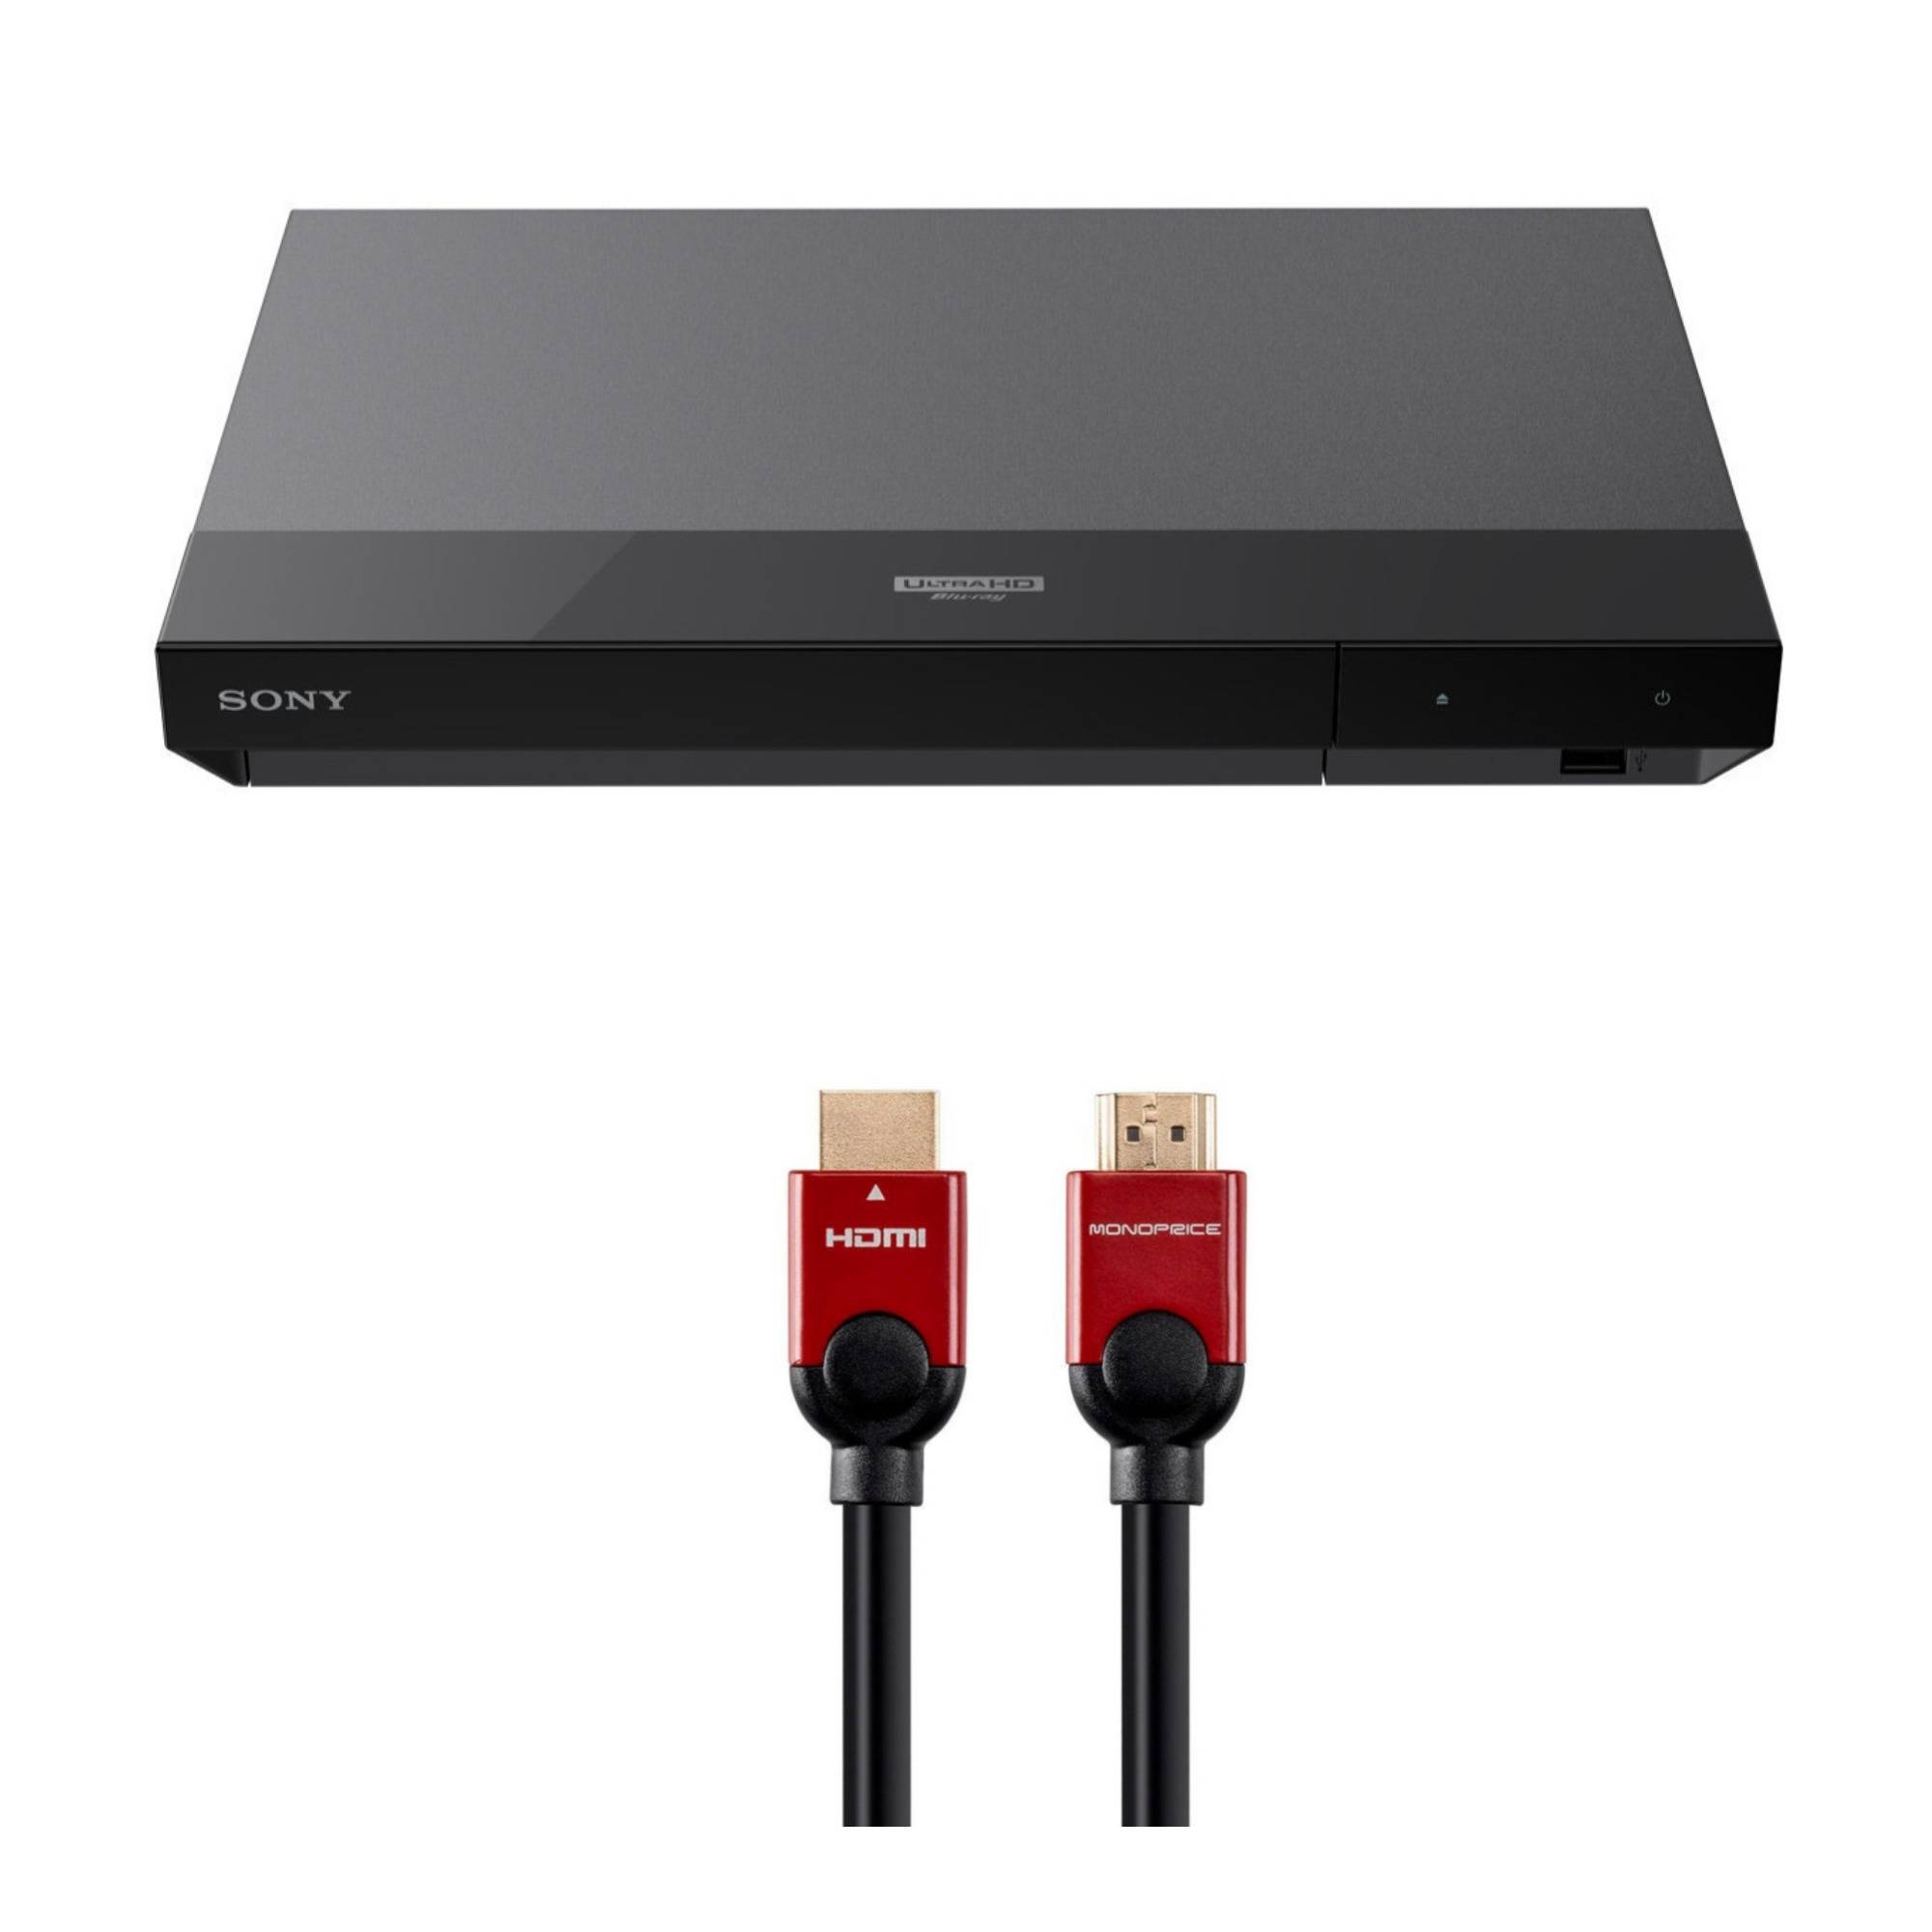 Sony UBP-X700 4K Ultra HD Blu-ray Player with HDMI Cable